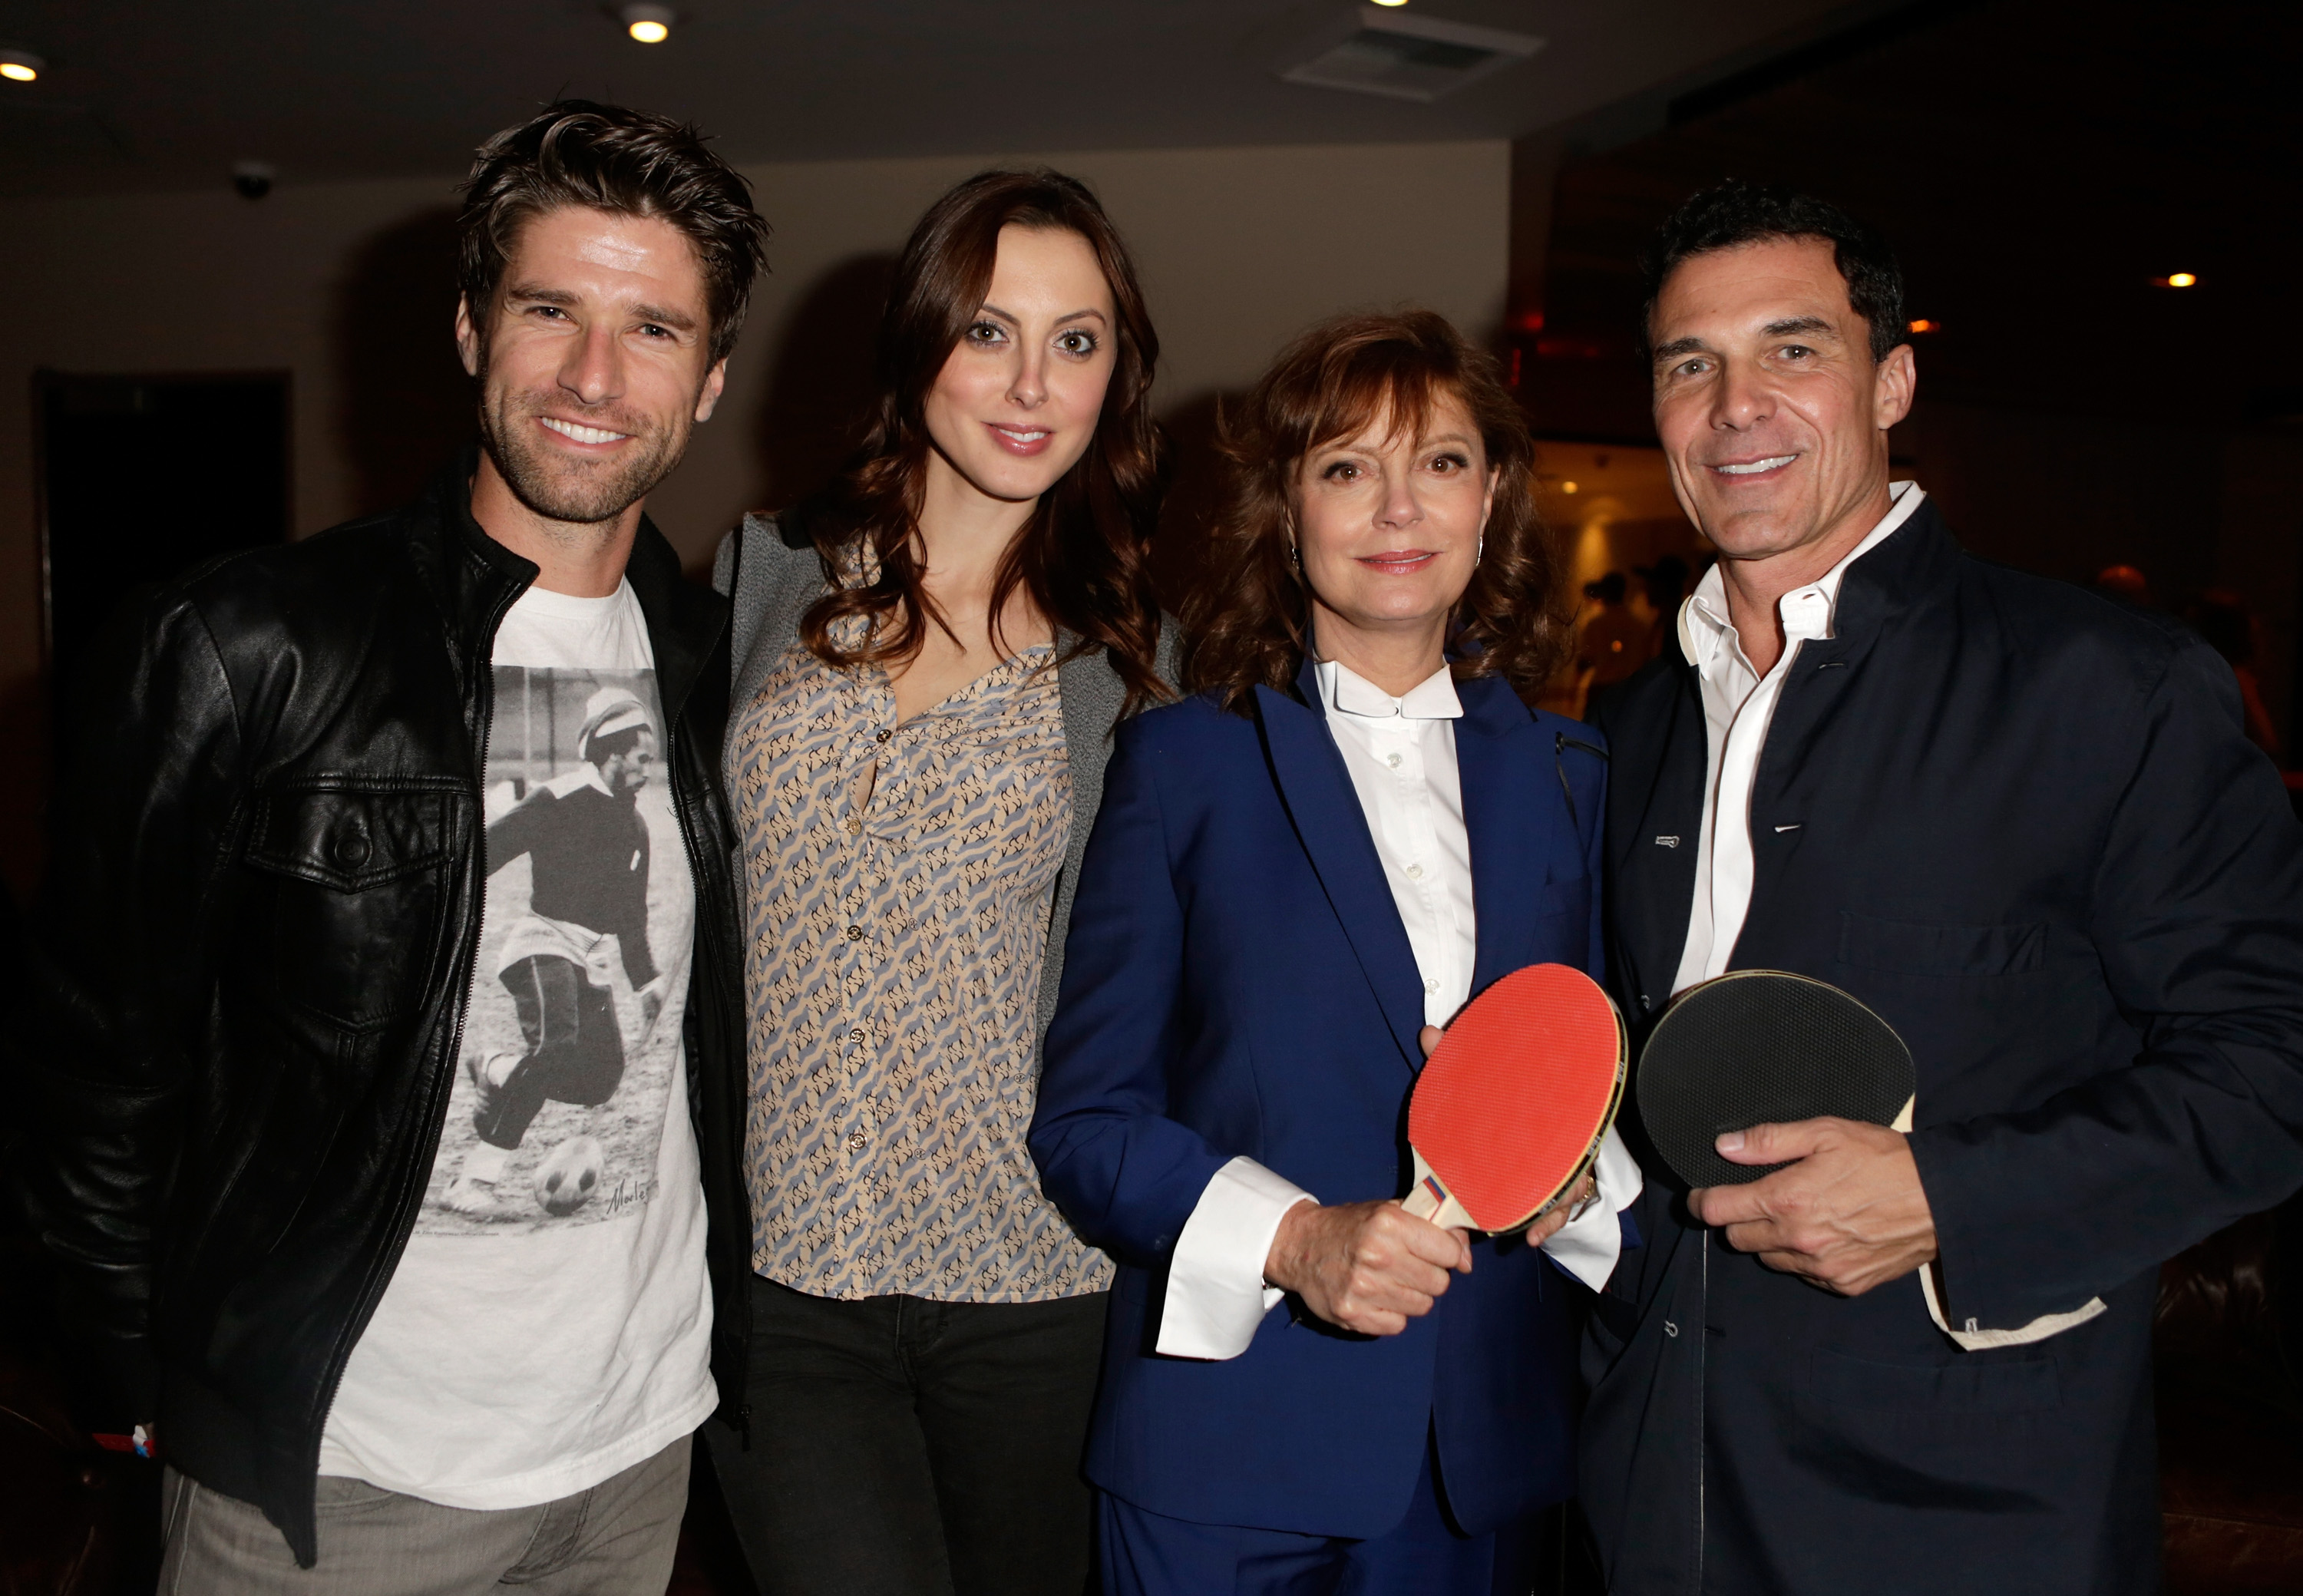 LOS ANGELES, CA - DECEMBER 11:  (L-R)  TV Personality Kyle Martino, actresses Eva Amurri Martino, Susan Sarandon and Andre Balazs attend SPiN Standard Ping Pong Social Club grand opening hosted by Susan Sarandon and Andre Balazs at The Standard, Downtown LA, on December 11, 2012 in Los Angeles, California.  (Photo by Jeff Vespa/WireImage)